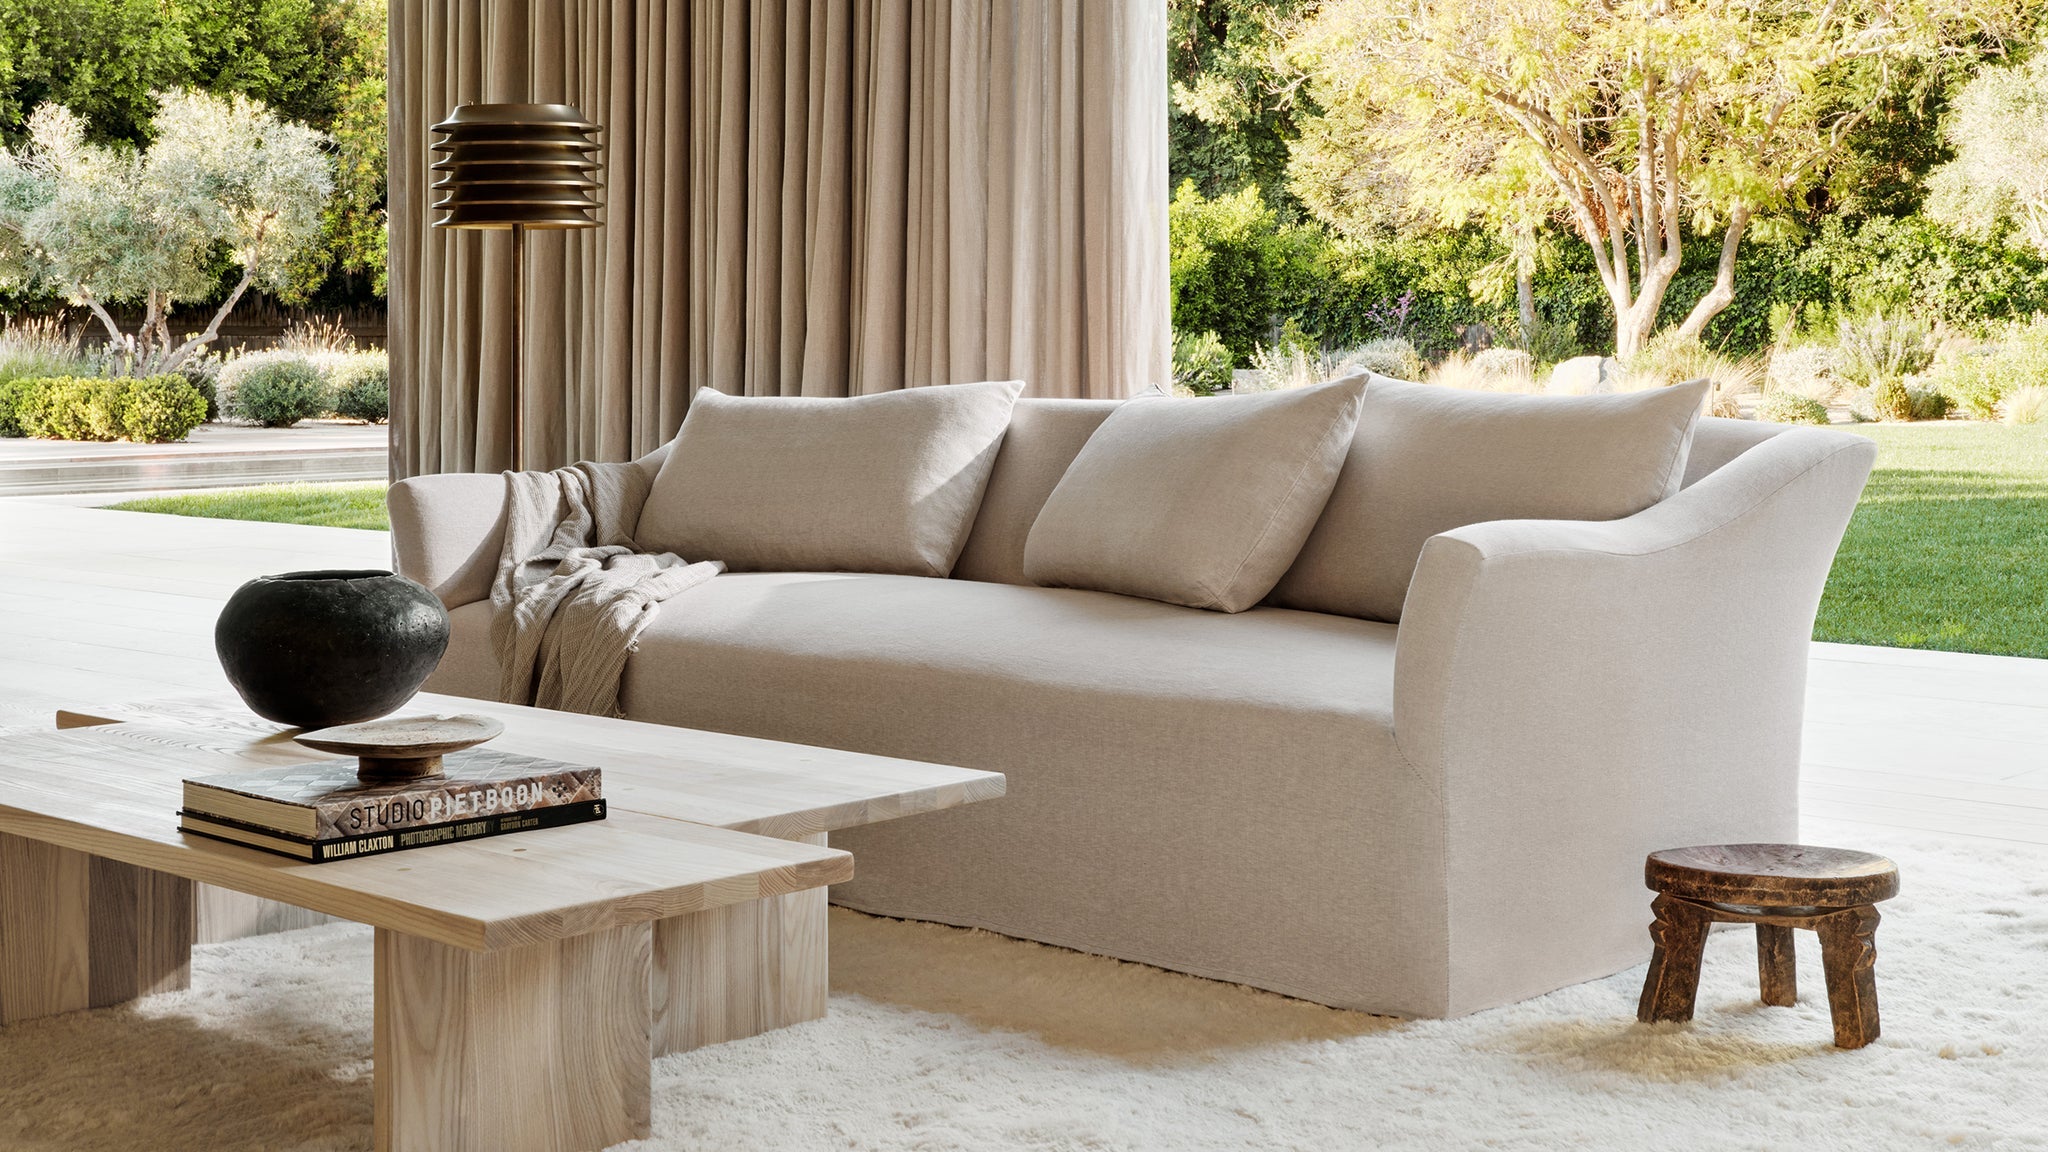 Loose cover linen sofa with sweeping arms beside the window